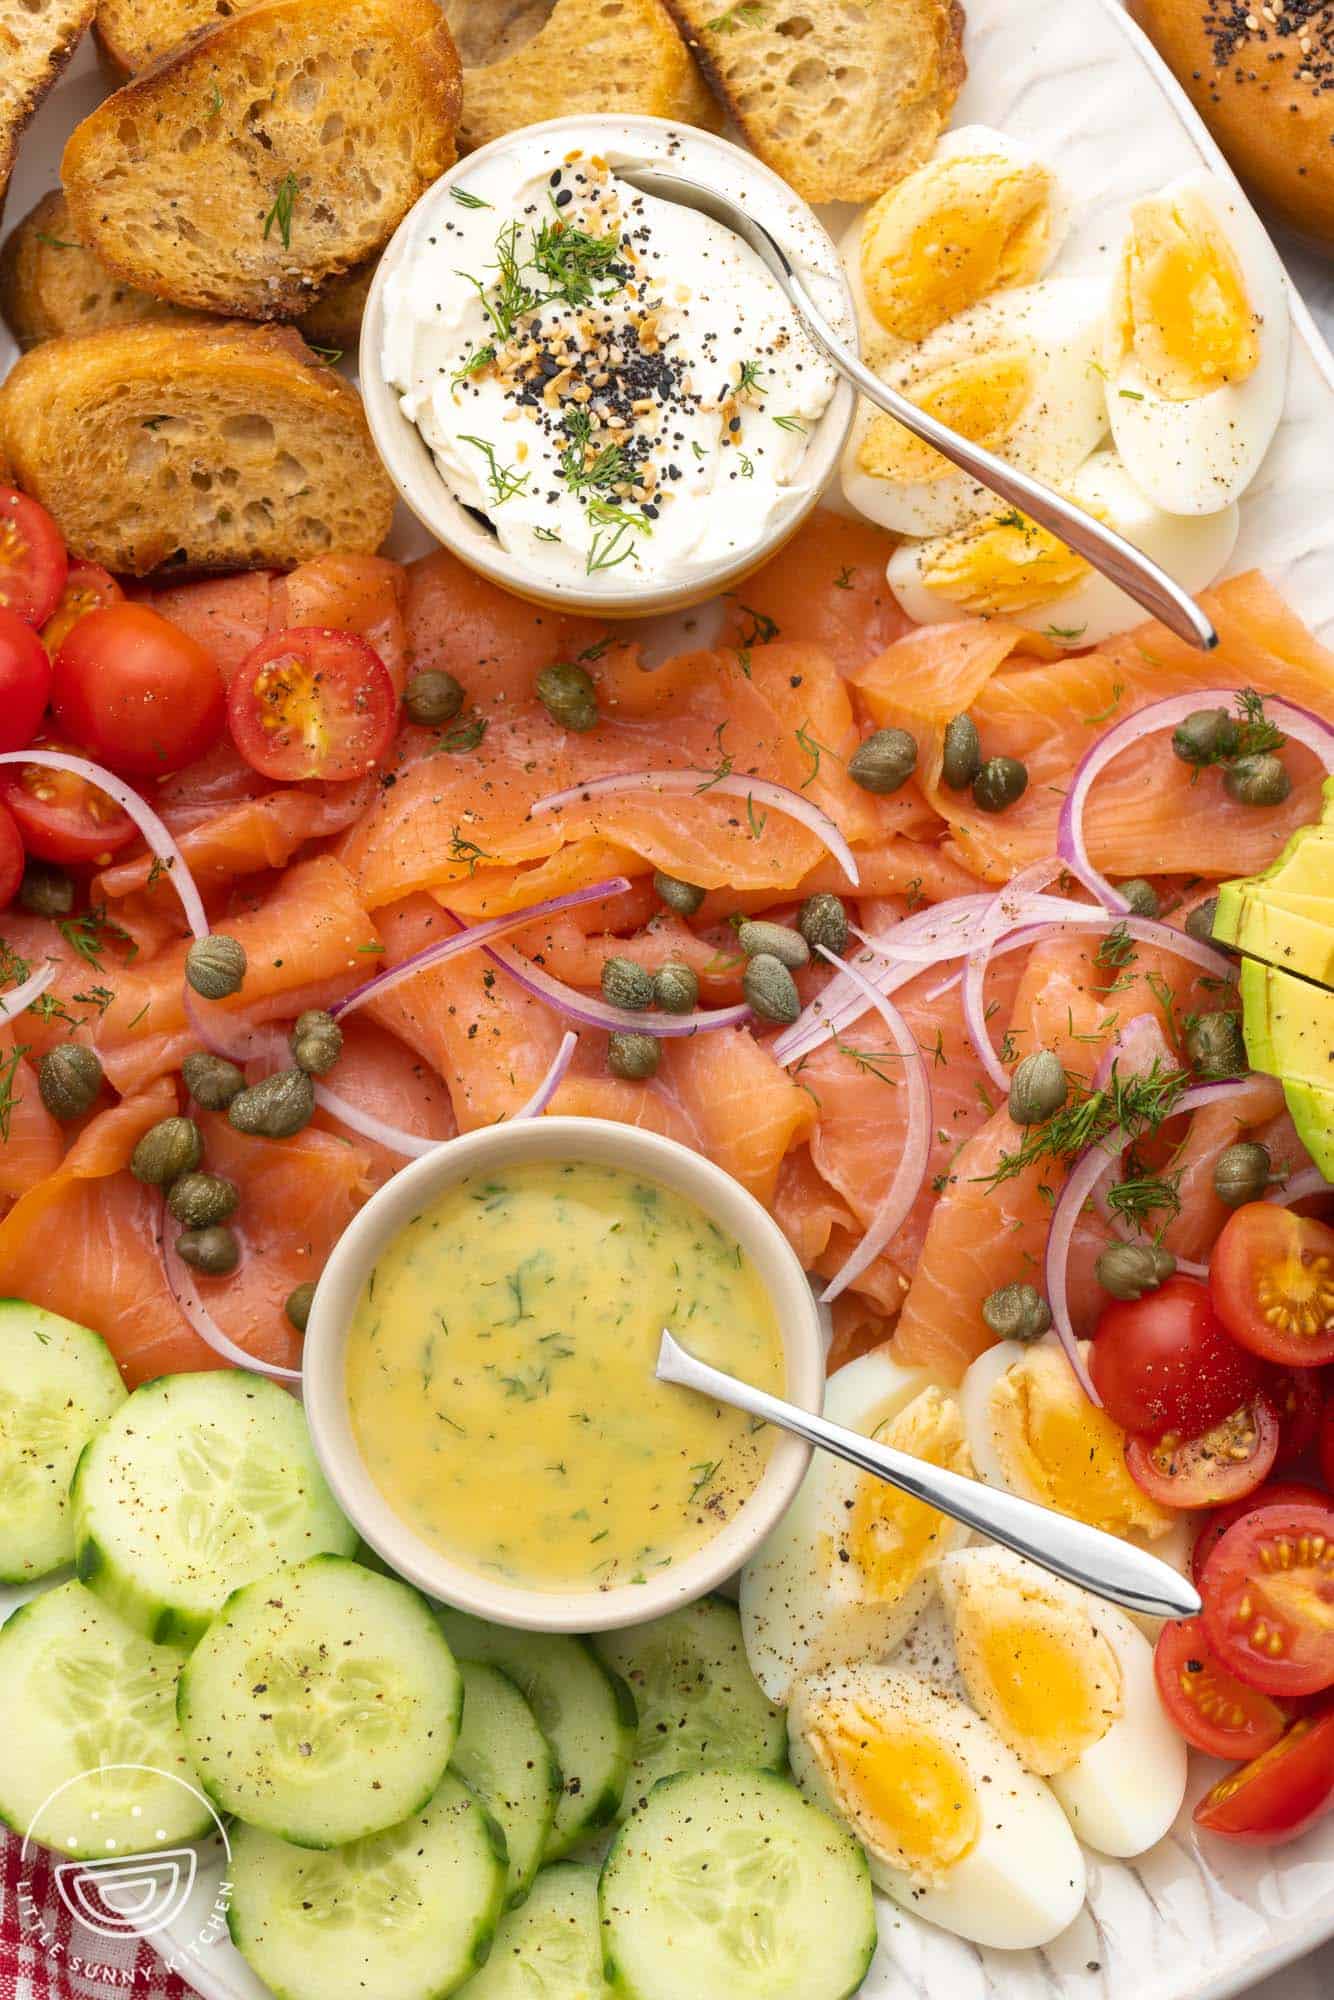 closeup of a smoked salmon platter with homemade sauces.